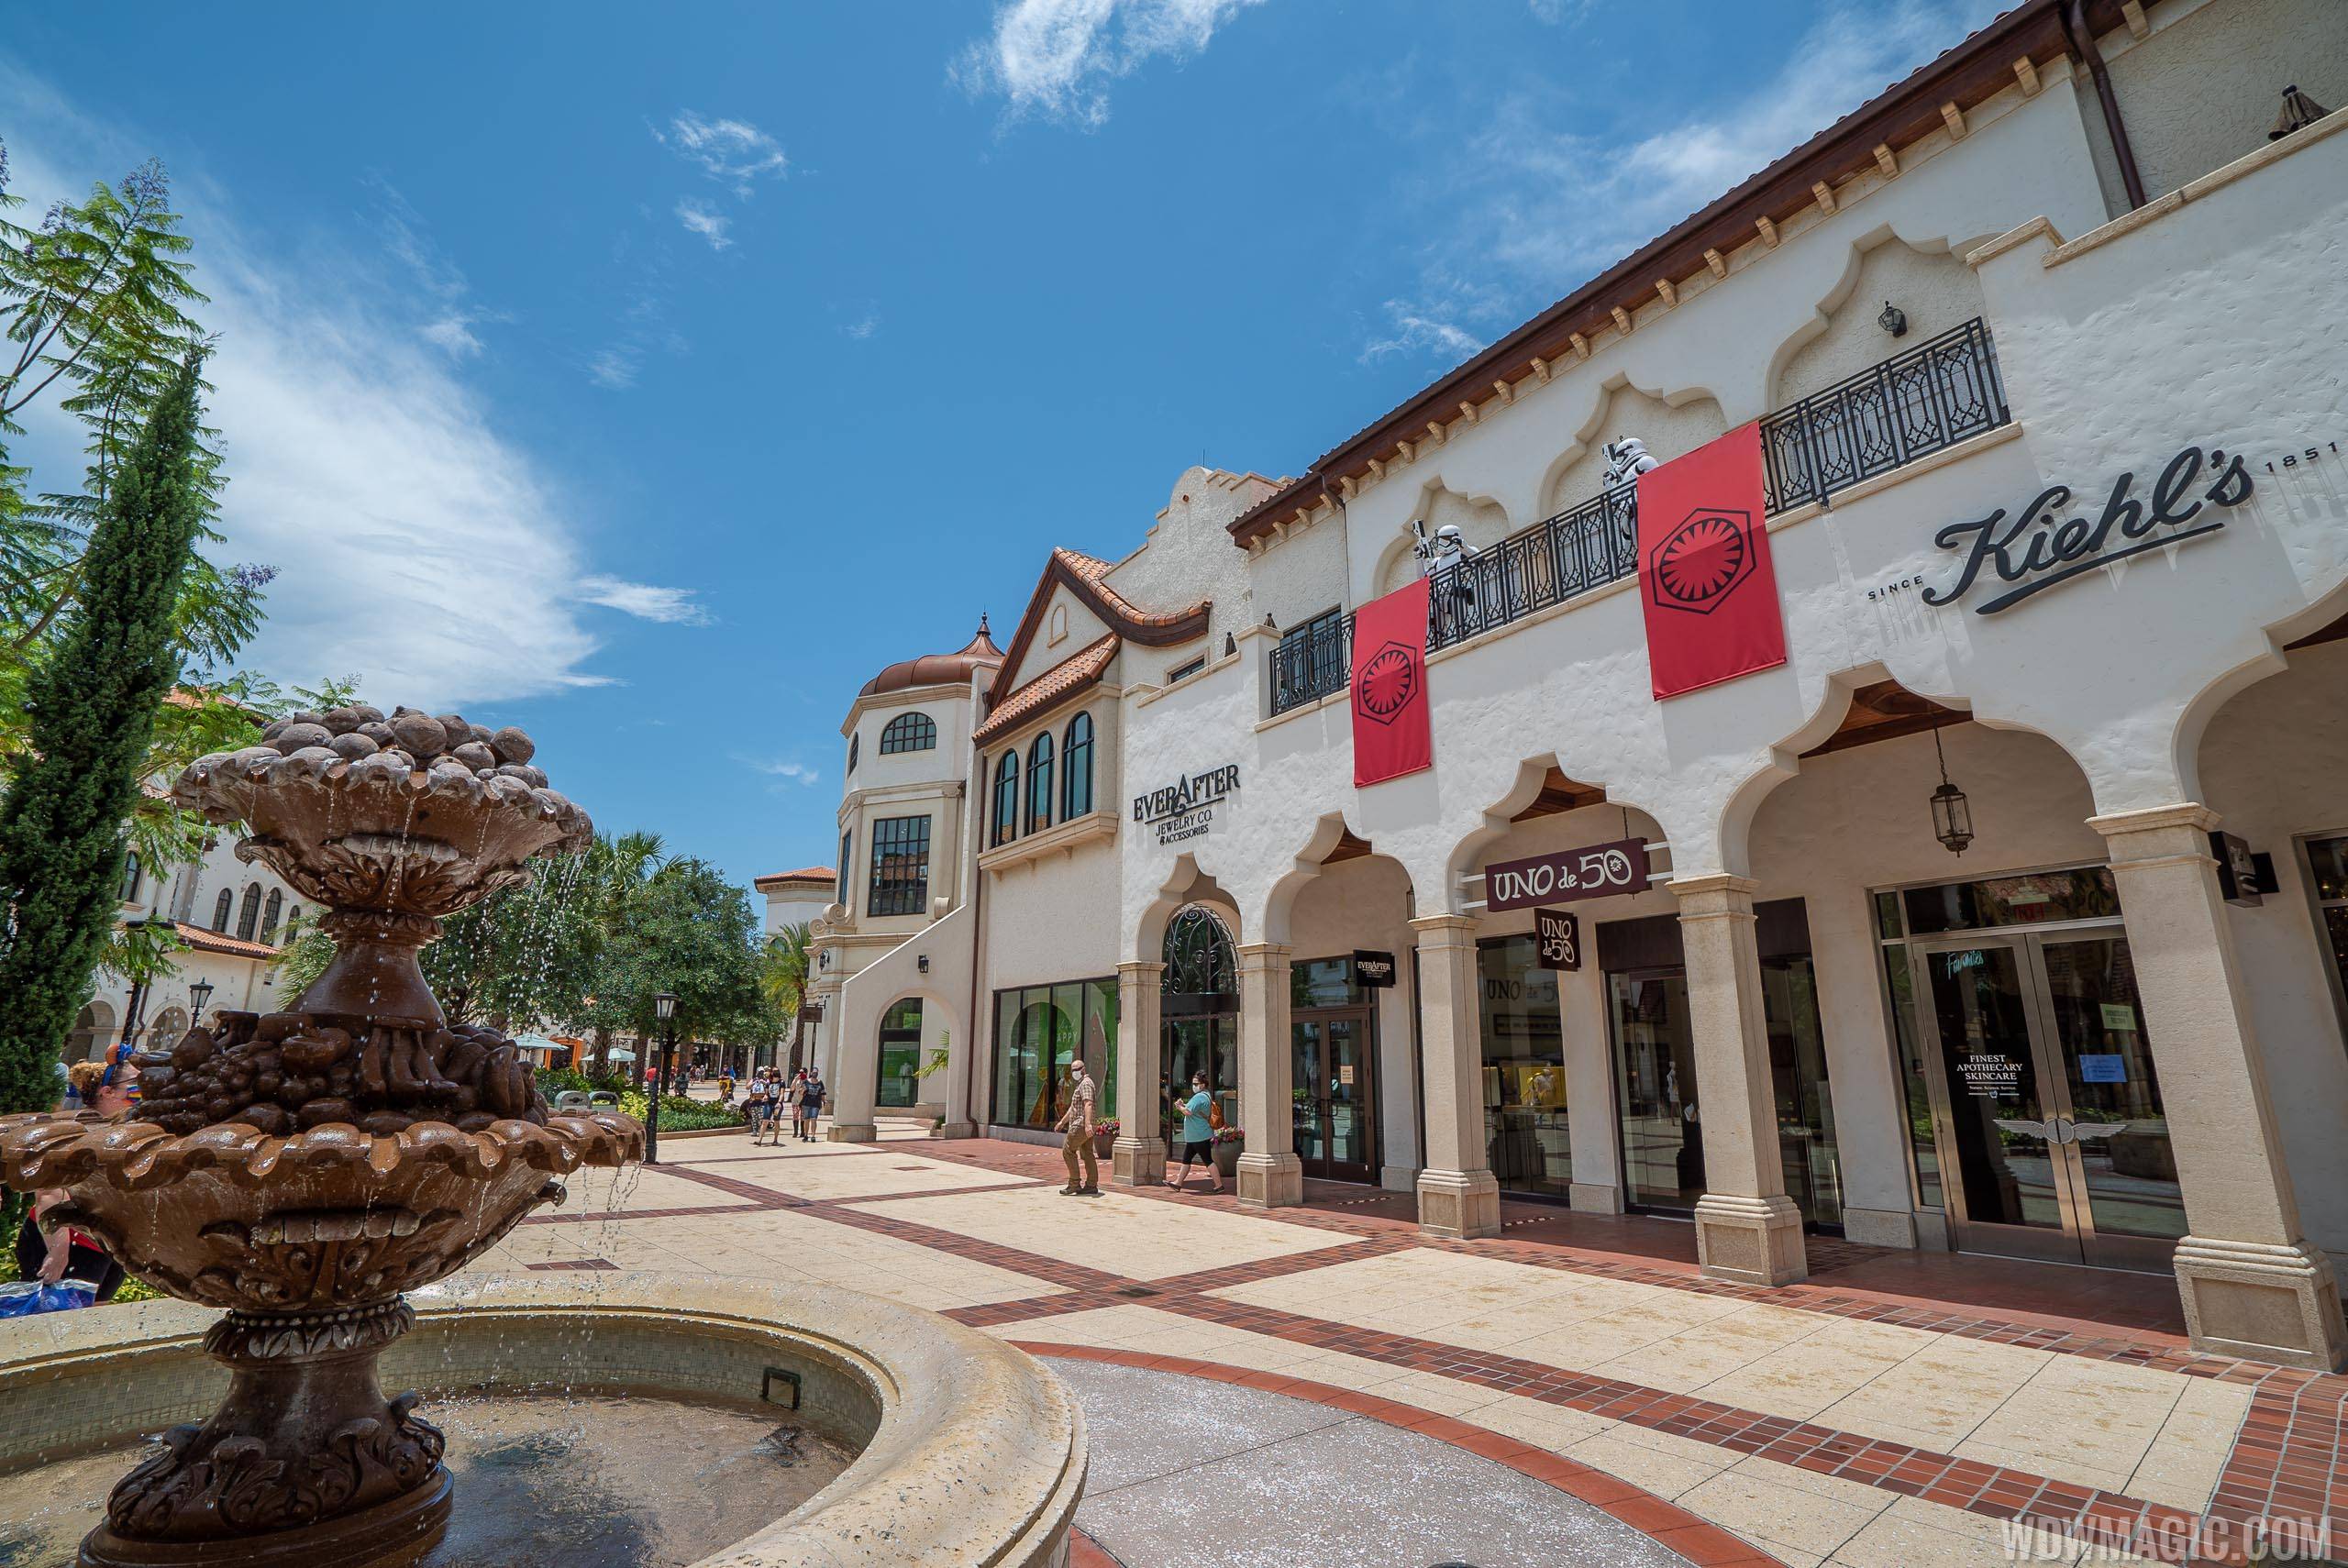 Disney Springs is in a phased reopening